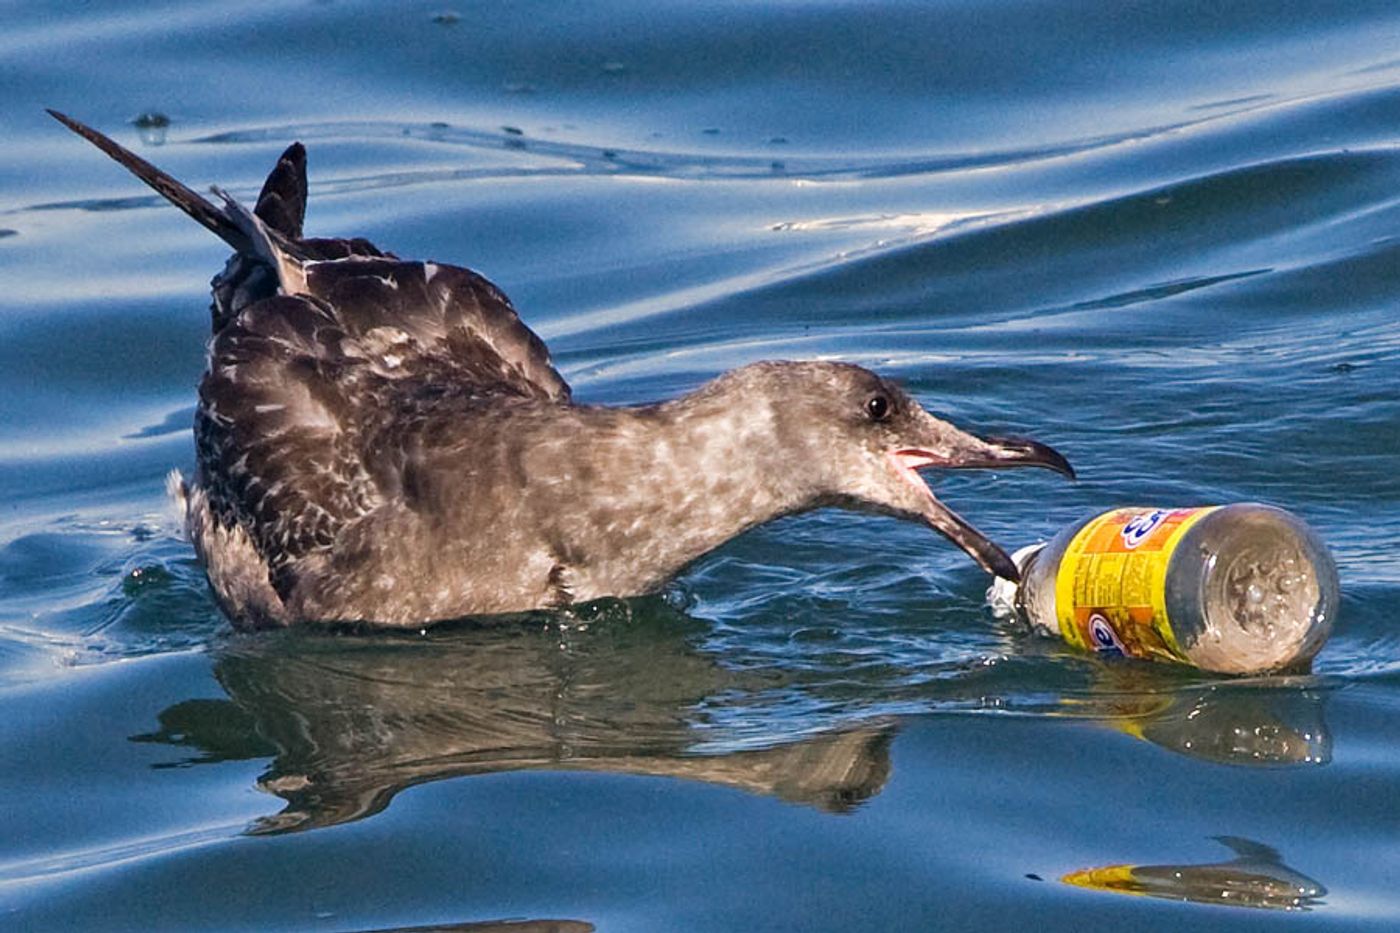 Seabirds are vulnerable to eating dangerous plastics floating in our ocean or washing up on beaches.